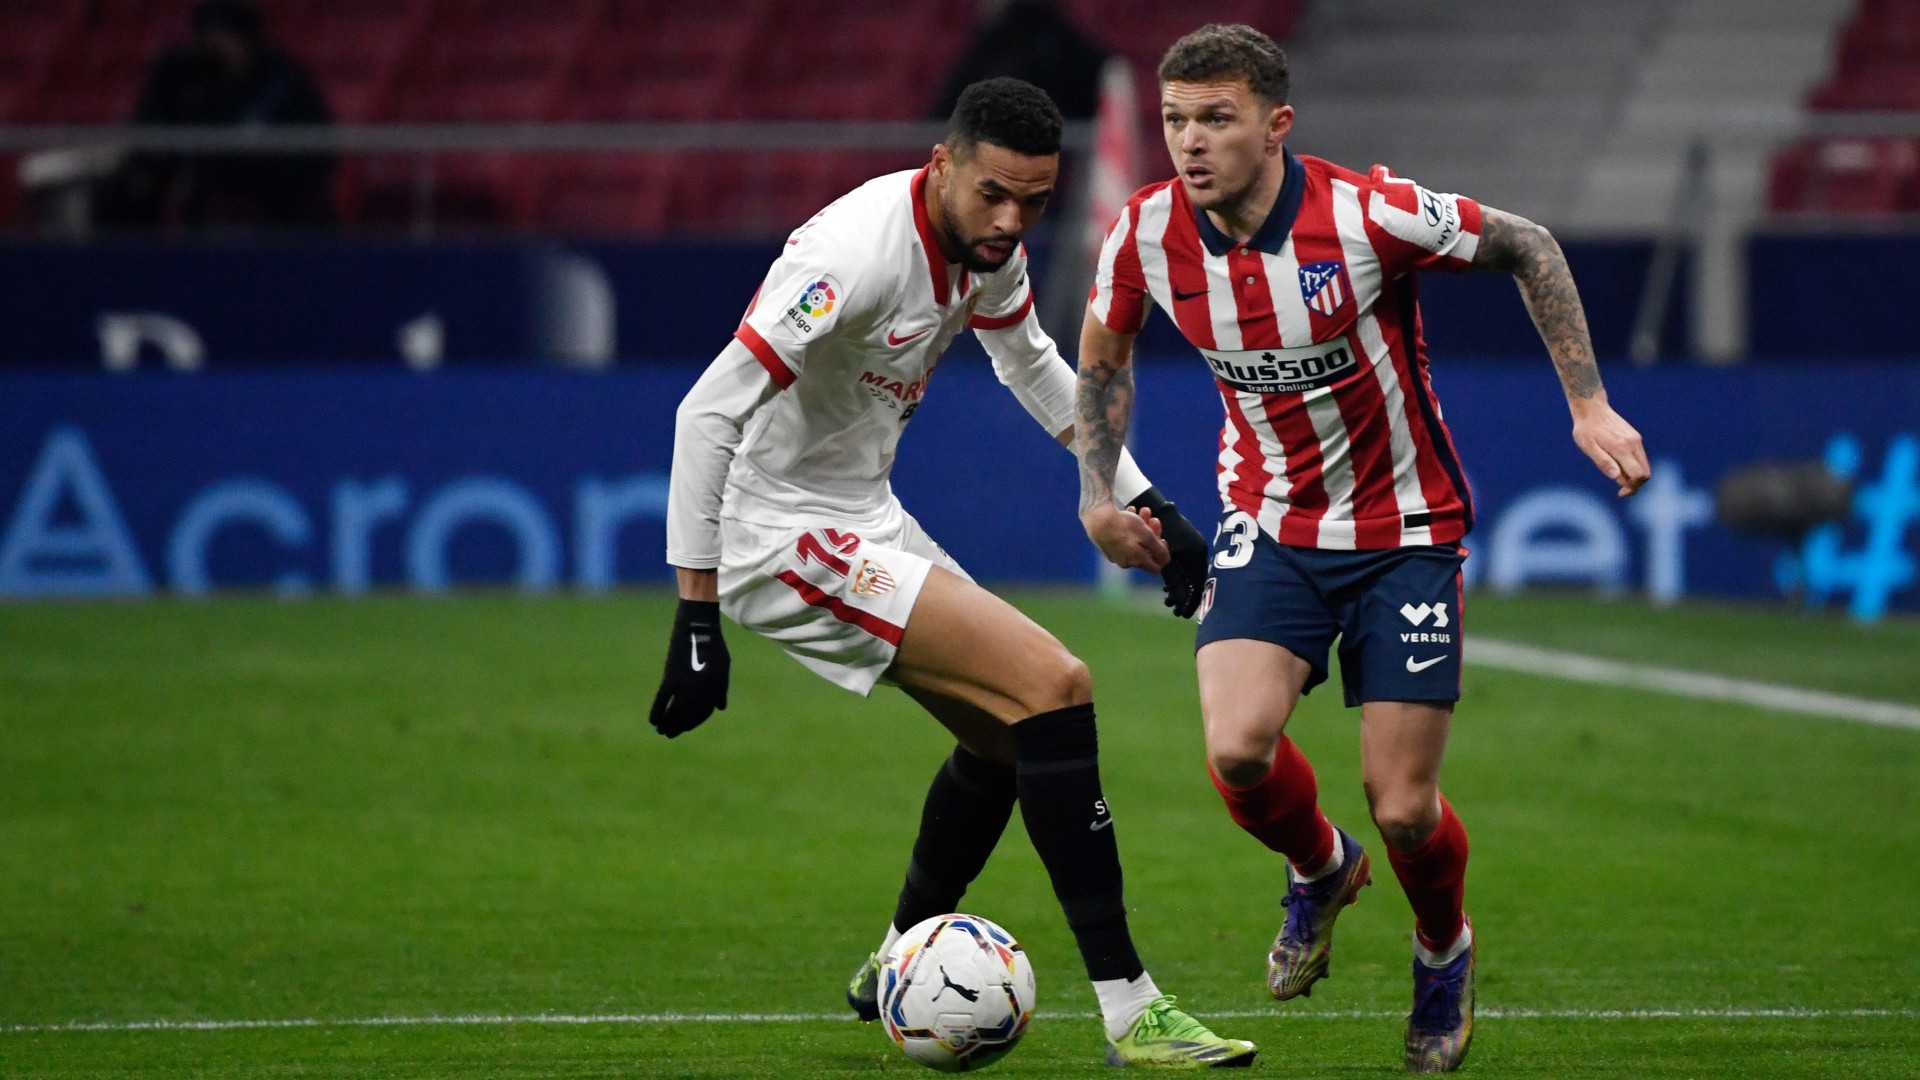 Trippier starts for Atletico Madrid for first time since betting ban suspended by FIFA